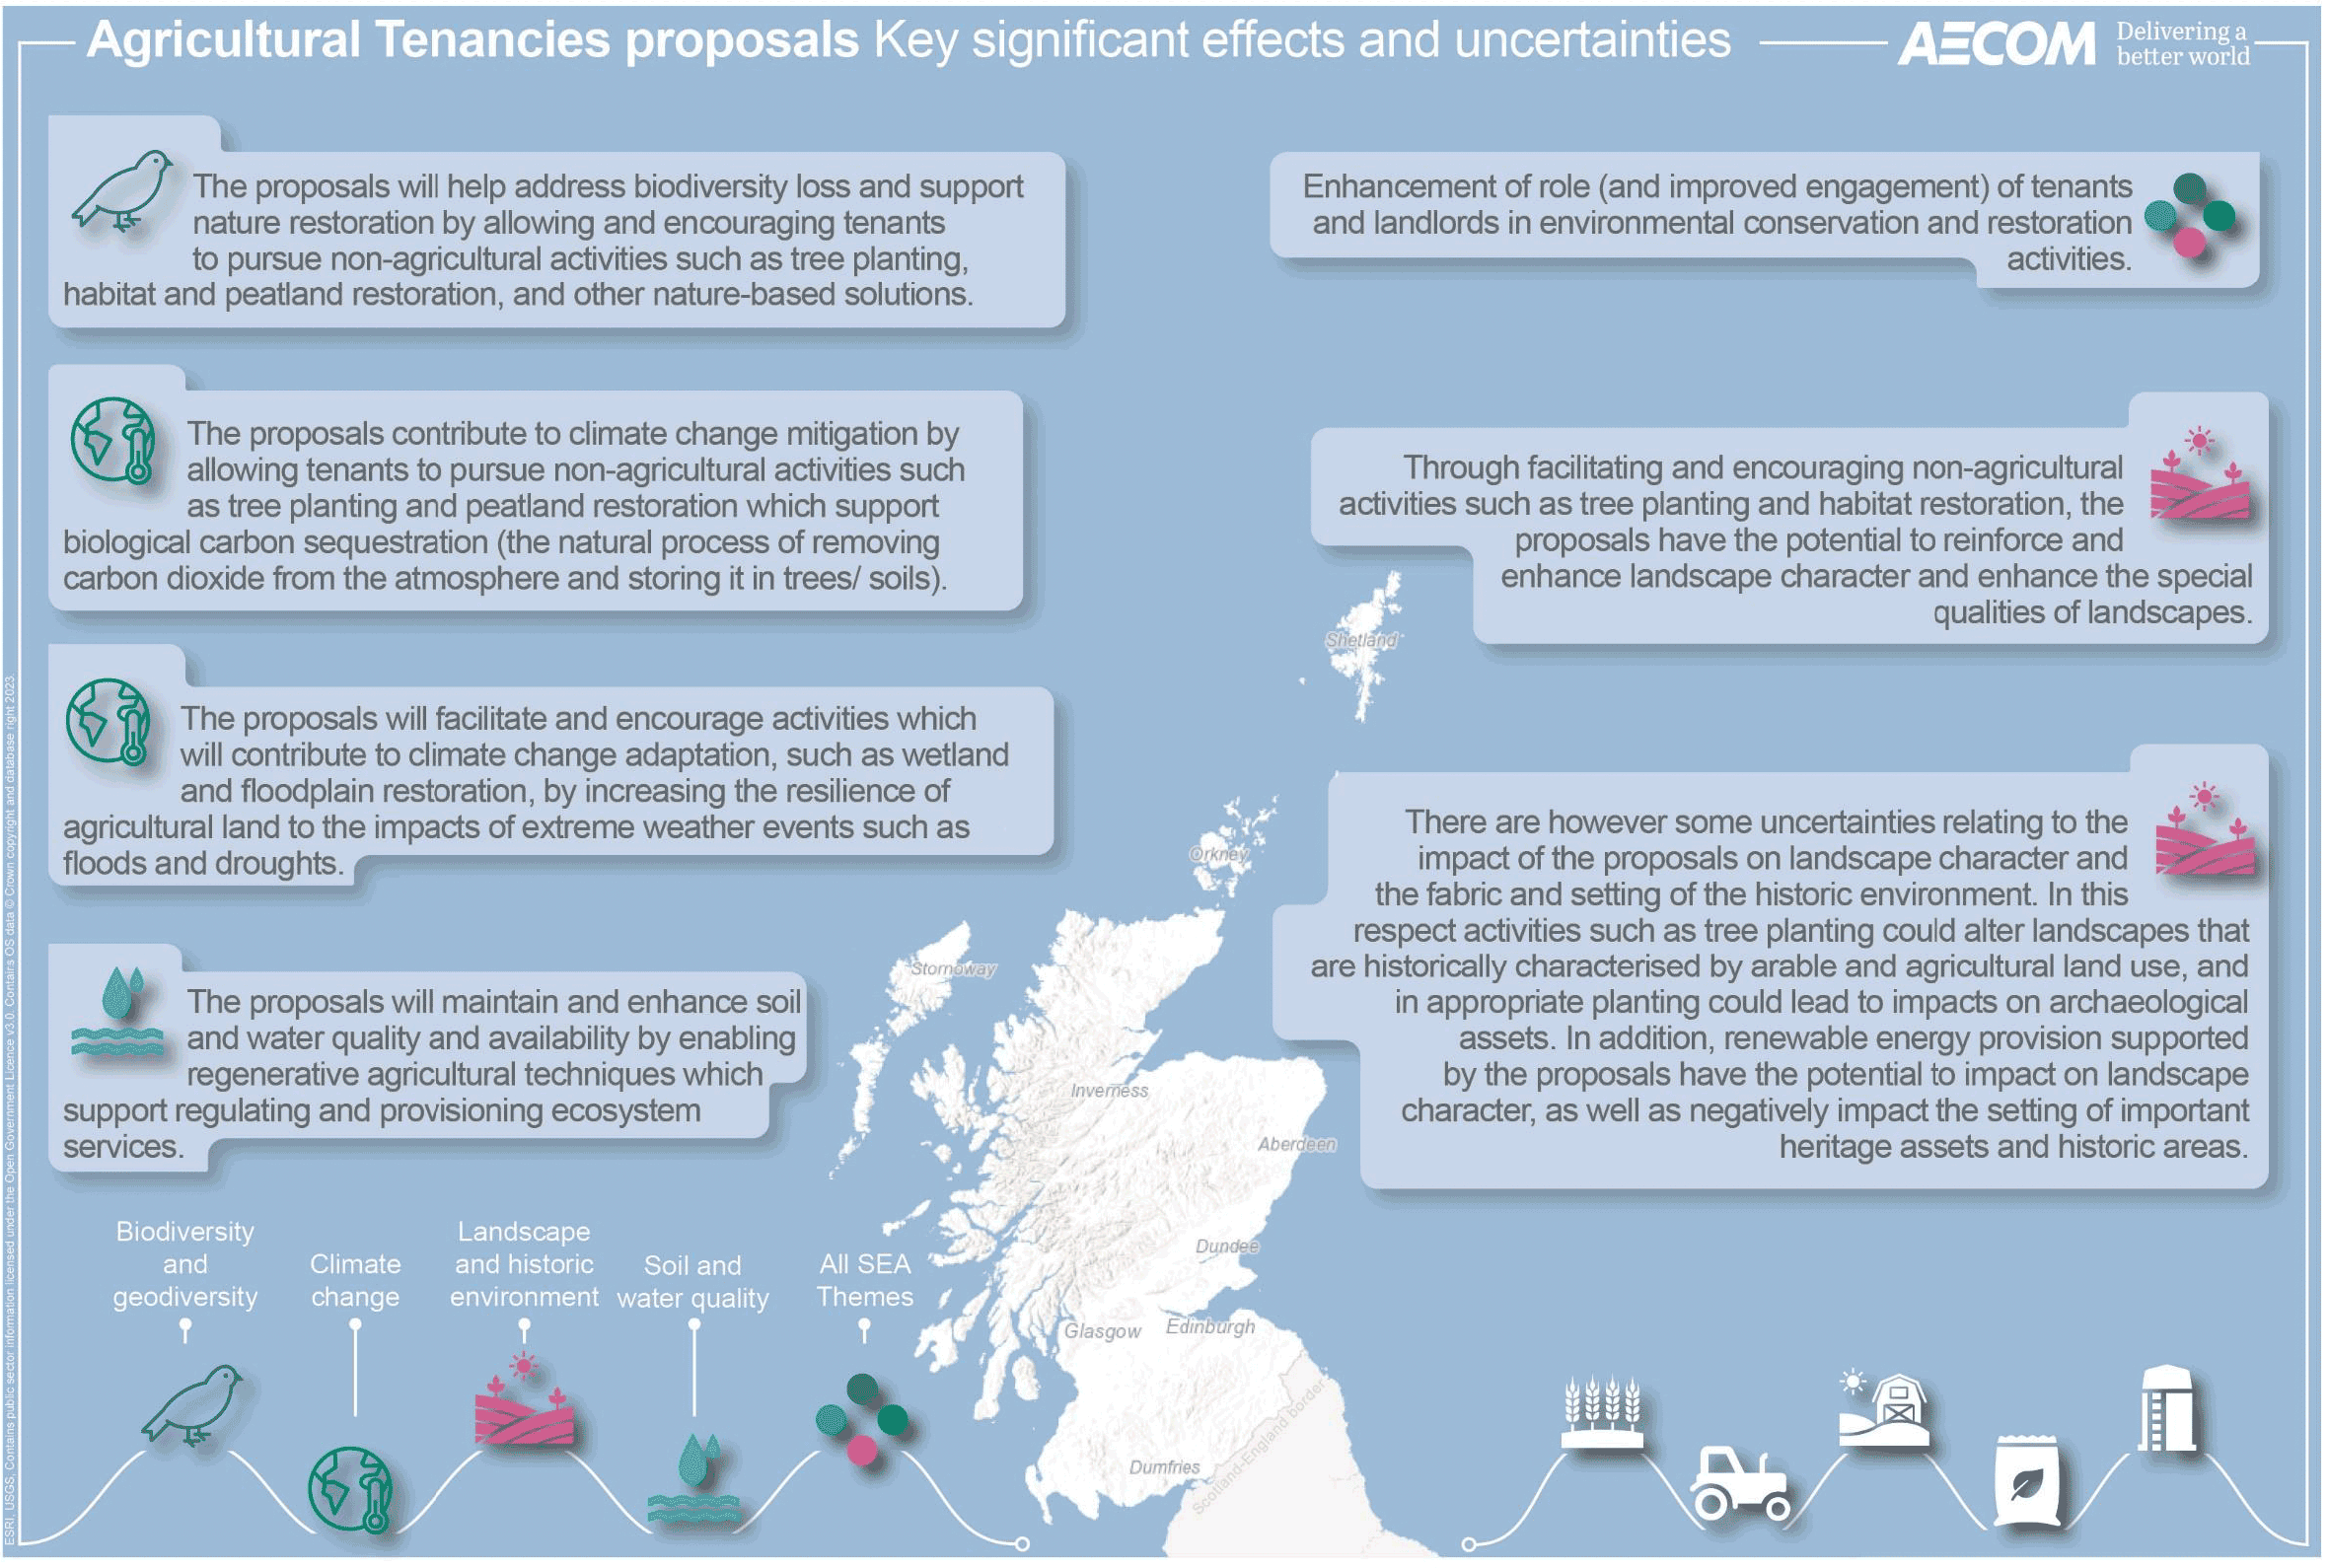 A diagram showing the key significant effects of, and uncertainties relating to, the Agricultural Tenancies proposals